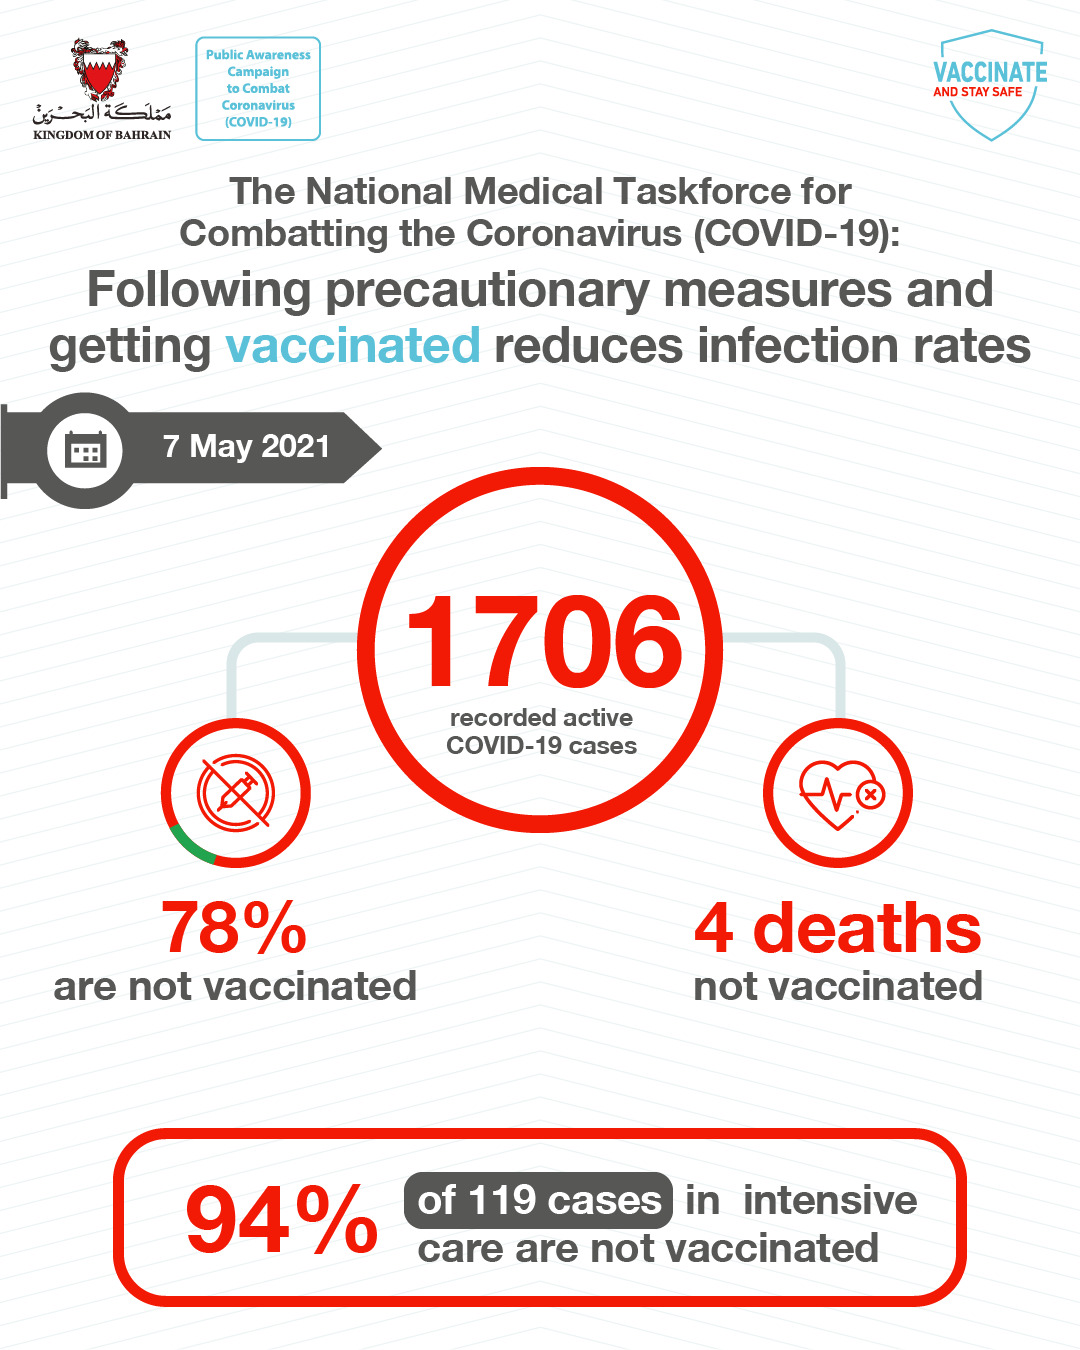 Medical Taskforce: High percentage of active COVID-19 cases not vaccinated: 08 May 2021